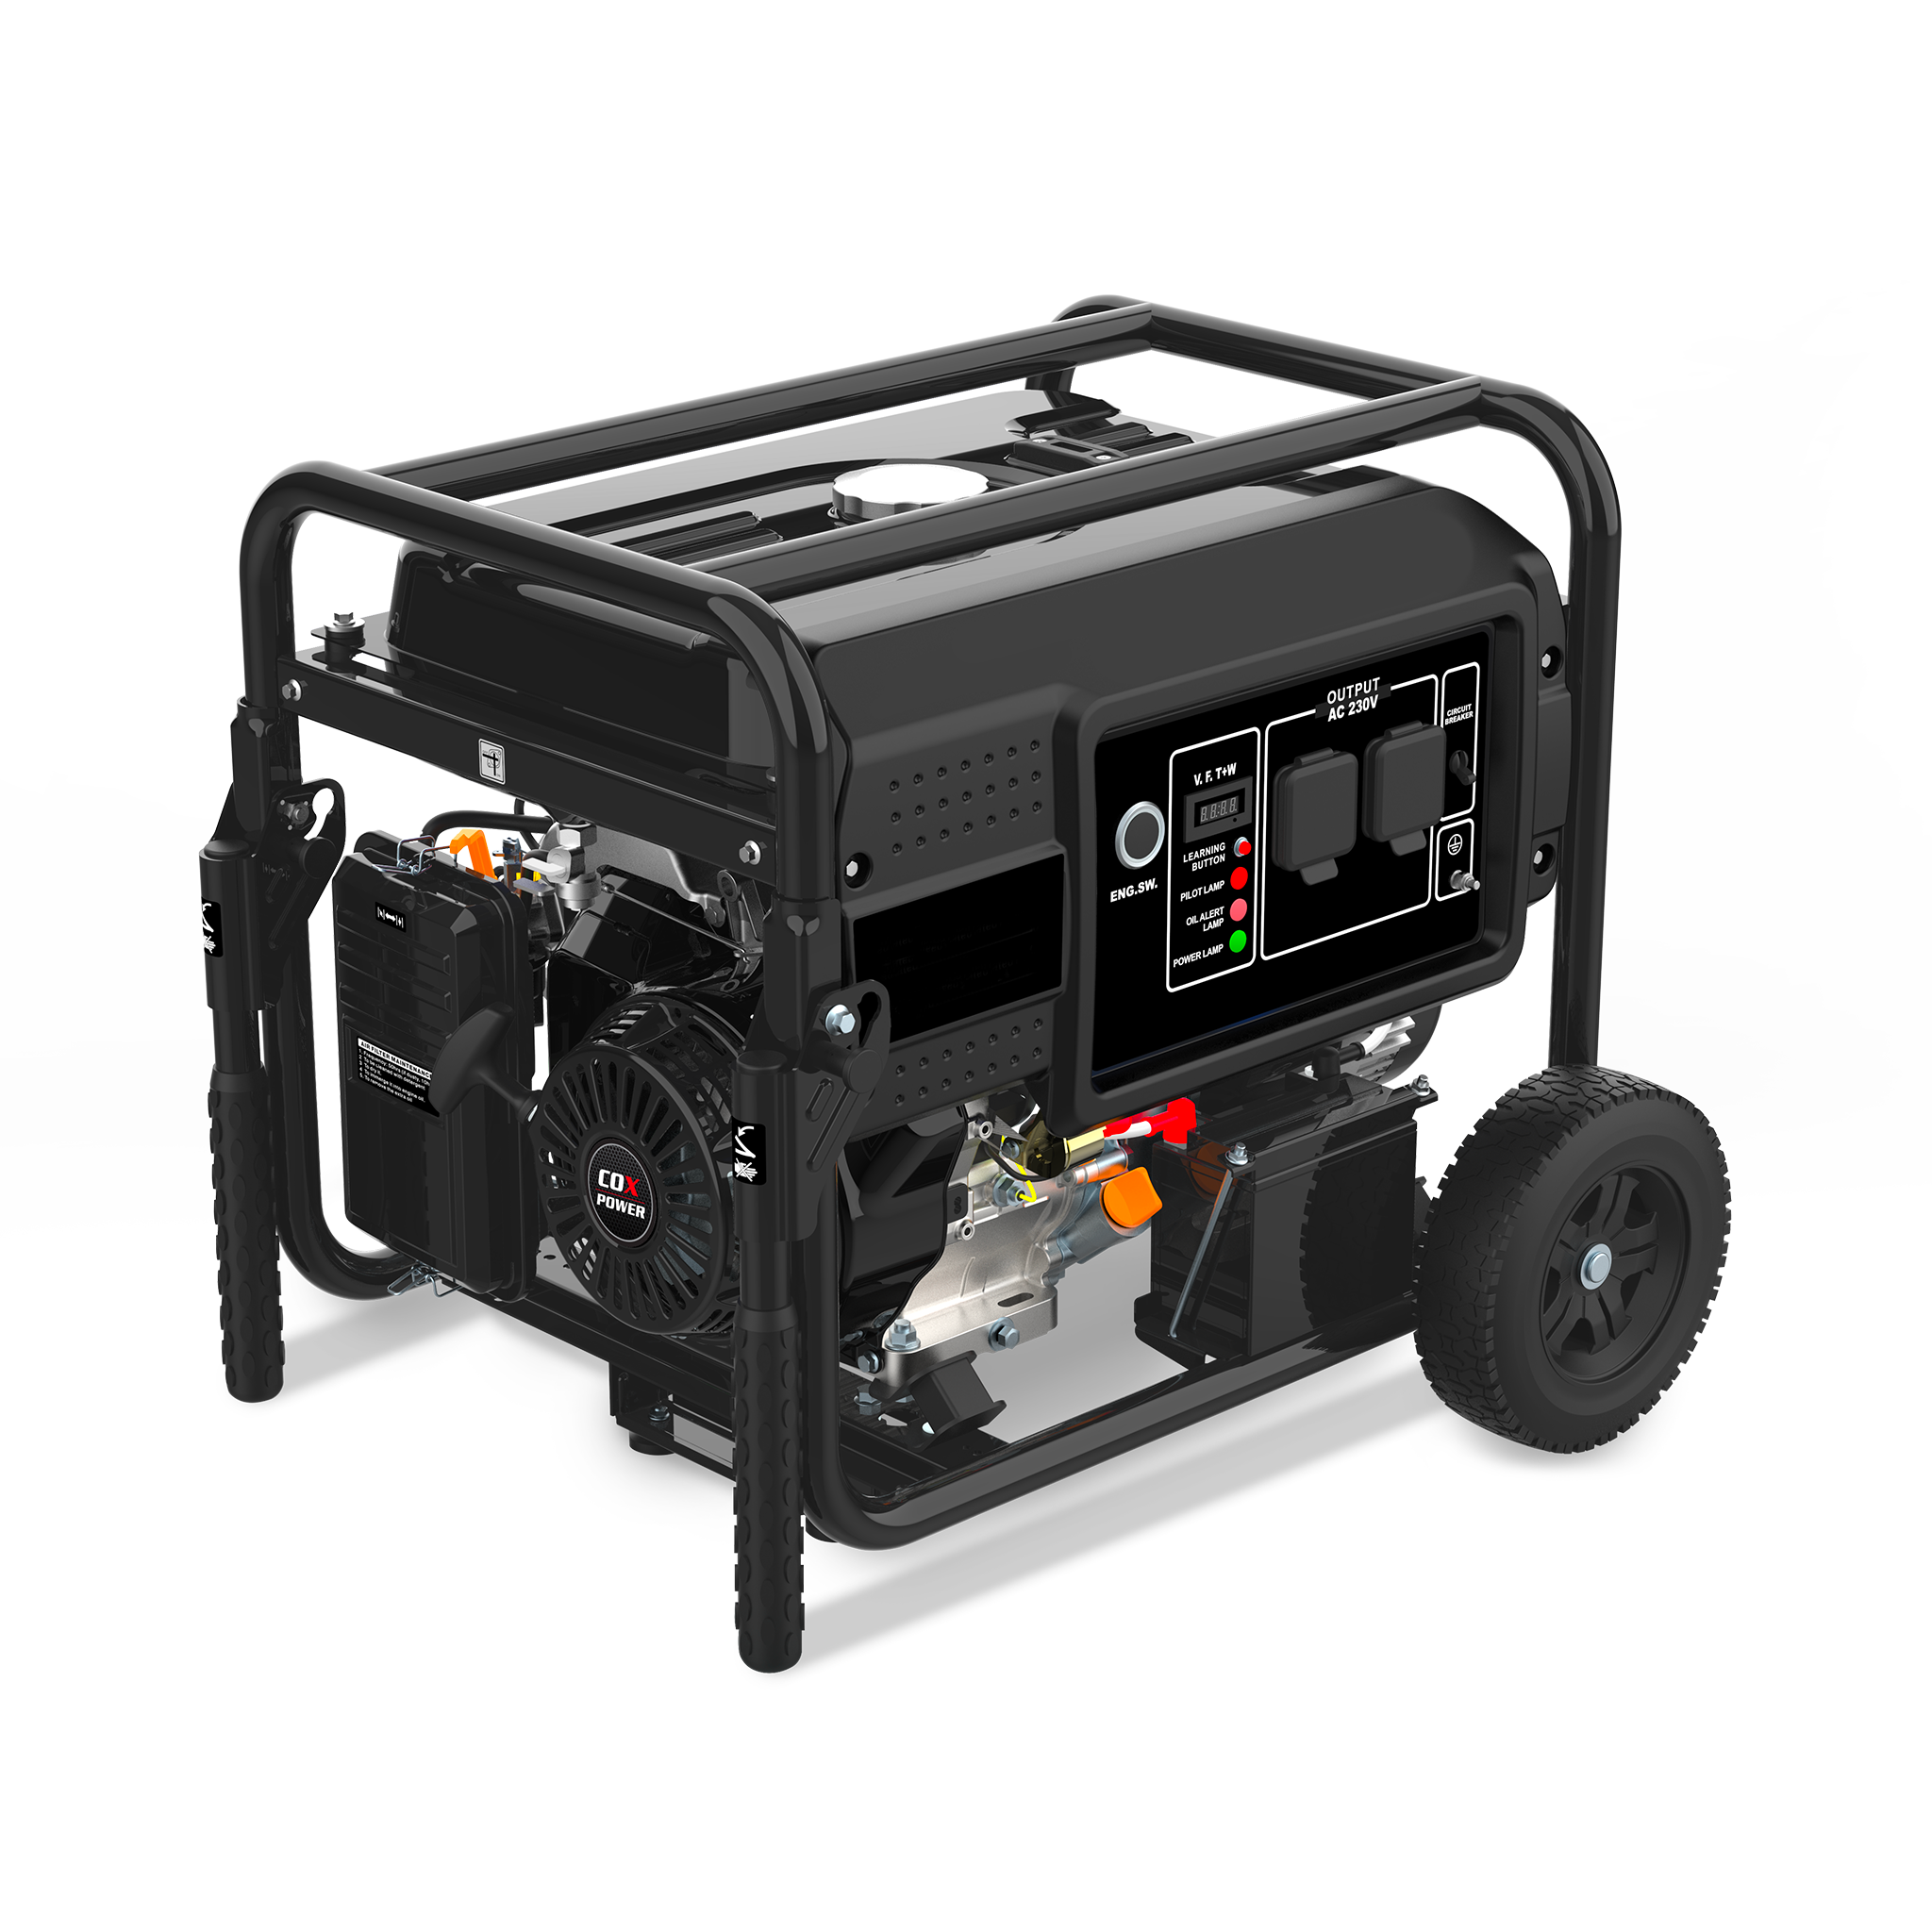 COX Power product image of a 4.8.kw Electric Start Generator